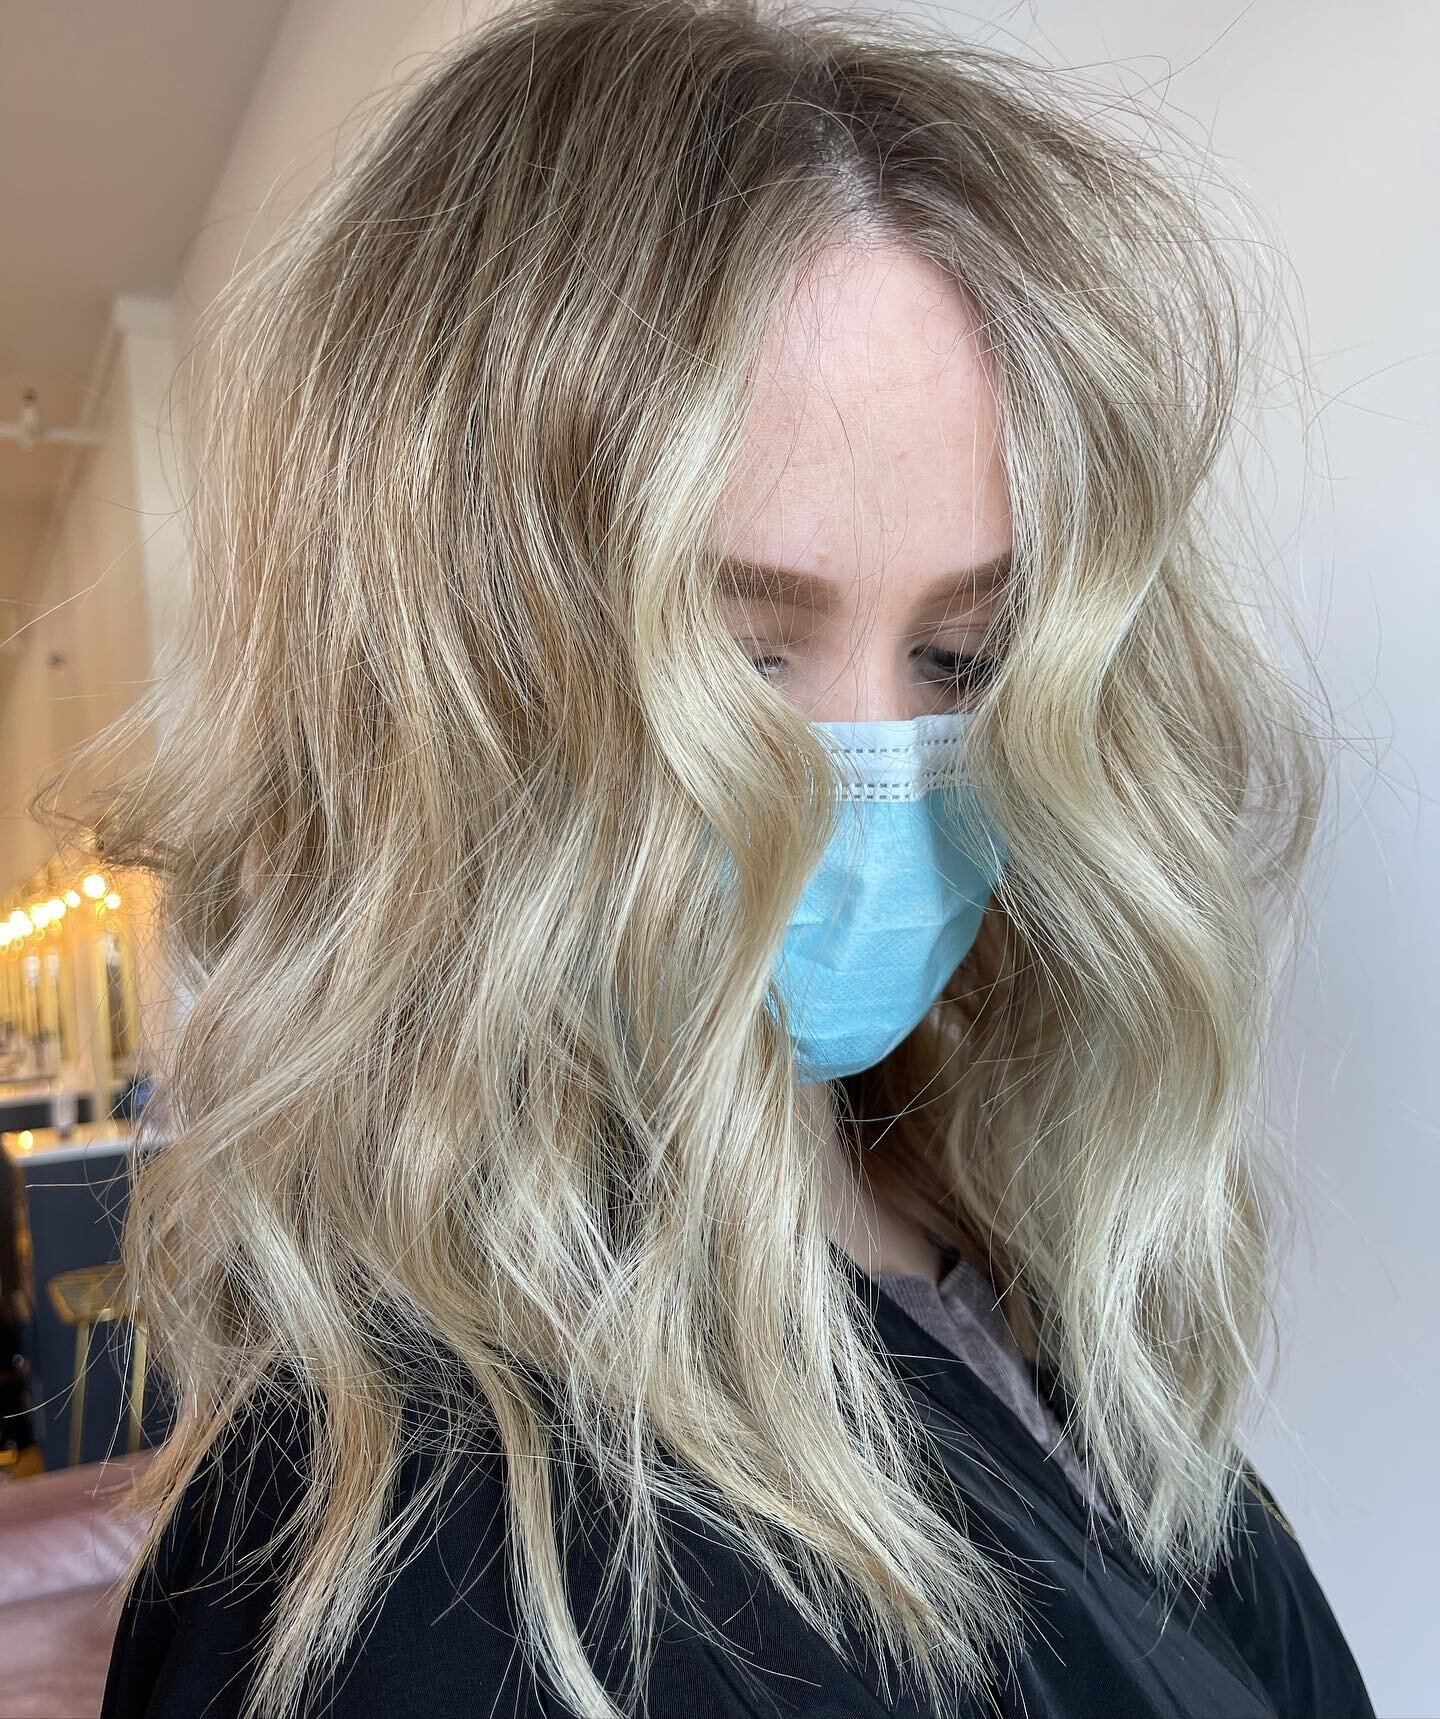 No vacation this winter? Feeling extra dull and pale? Get some highlights...they work wonders for your mood ☀️ 

#goldwell #oligopro #blonde #highlights #teasylights #beachhair #fairfieldcounty